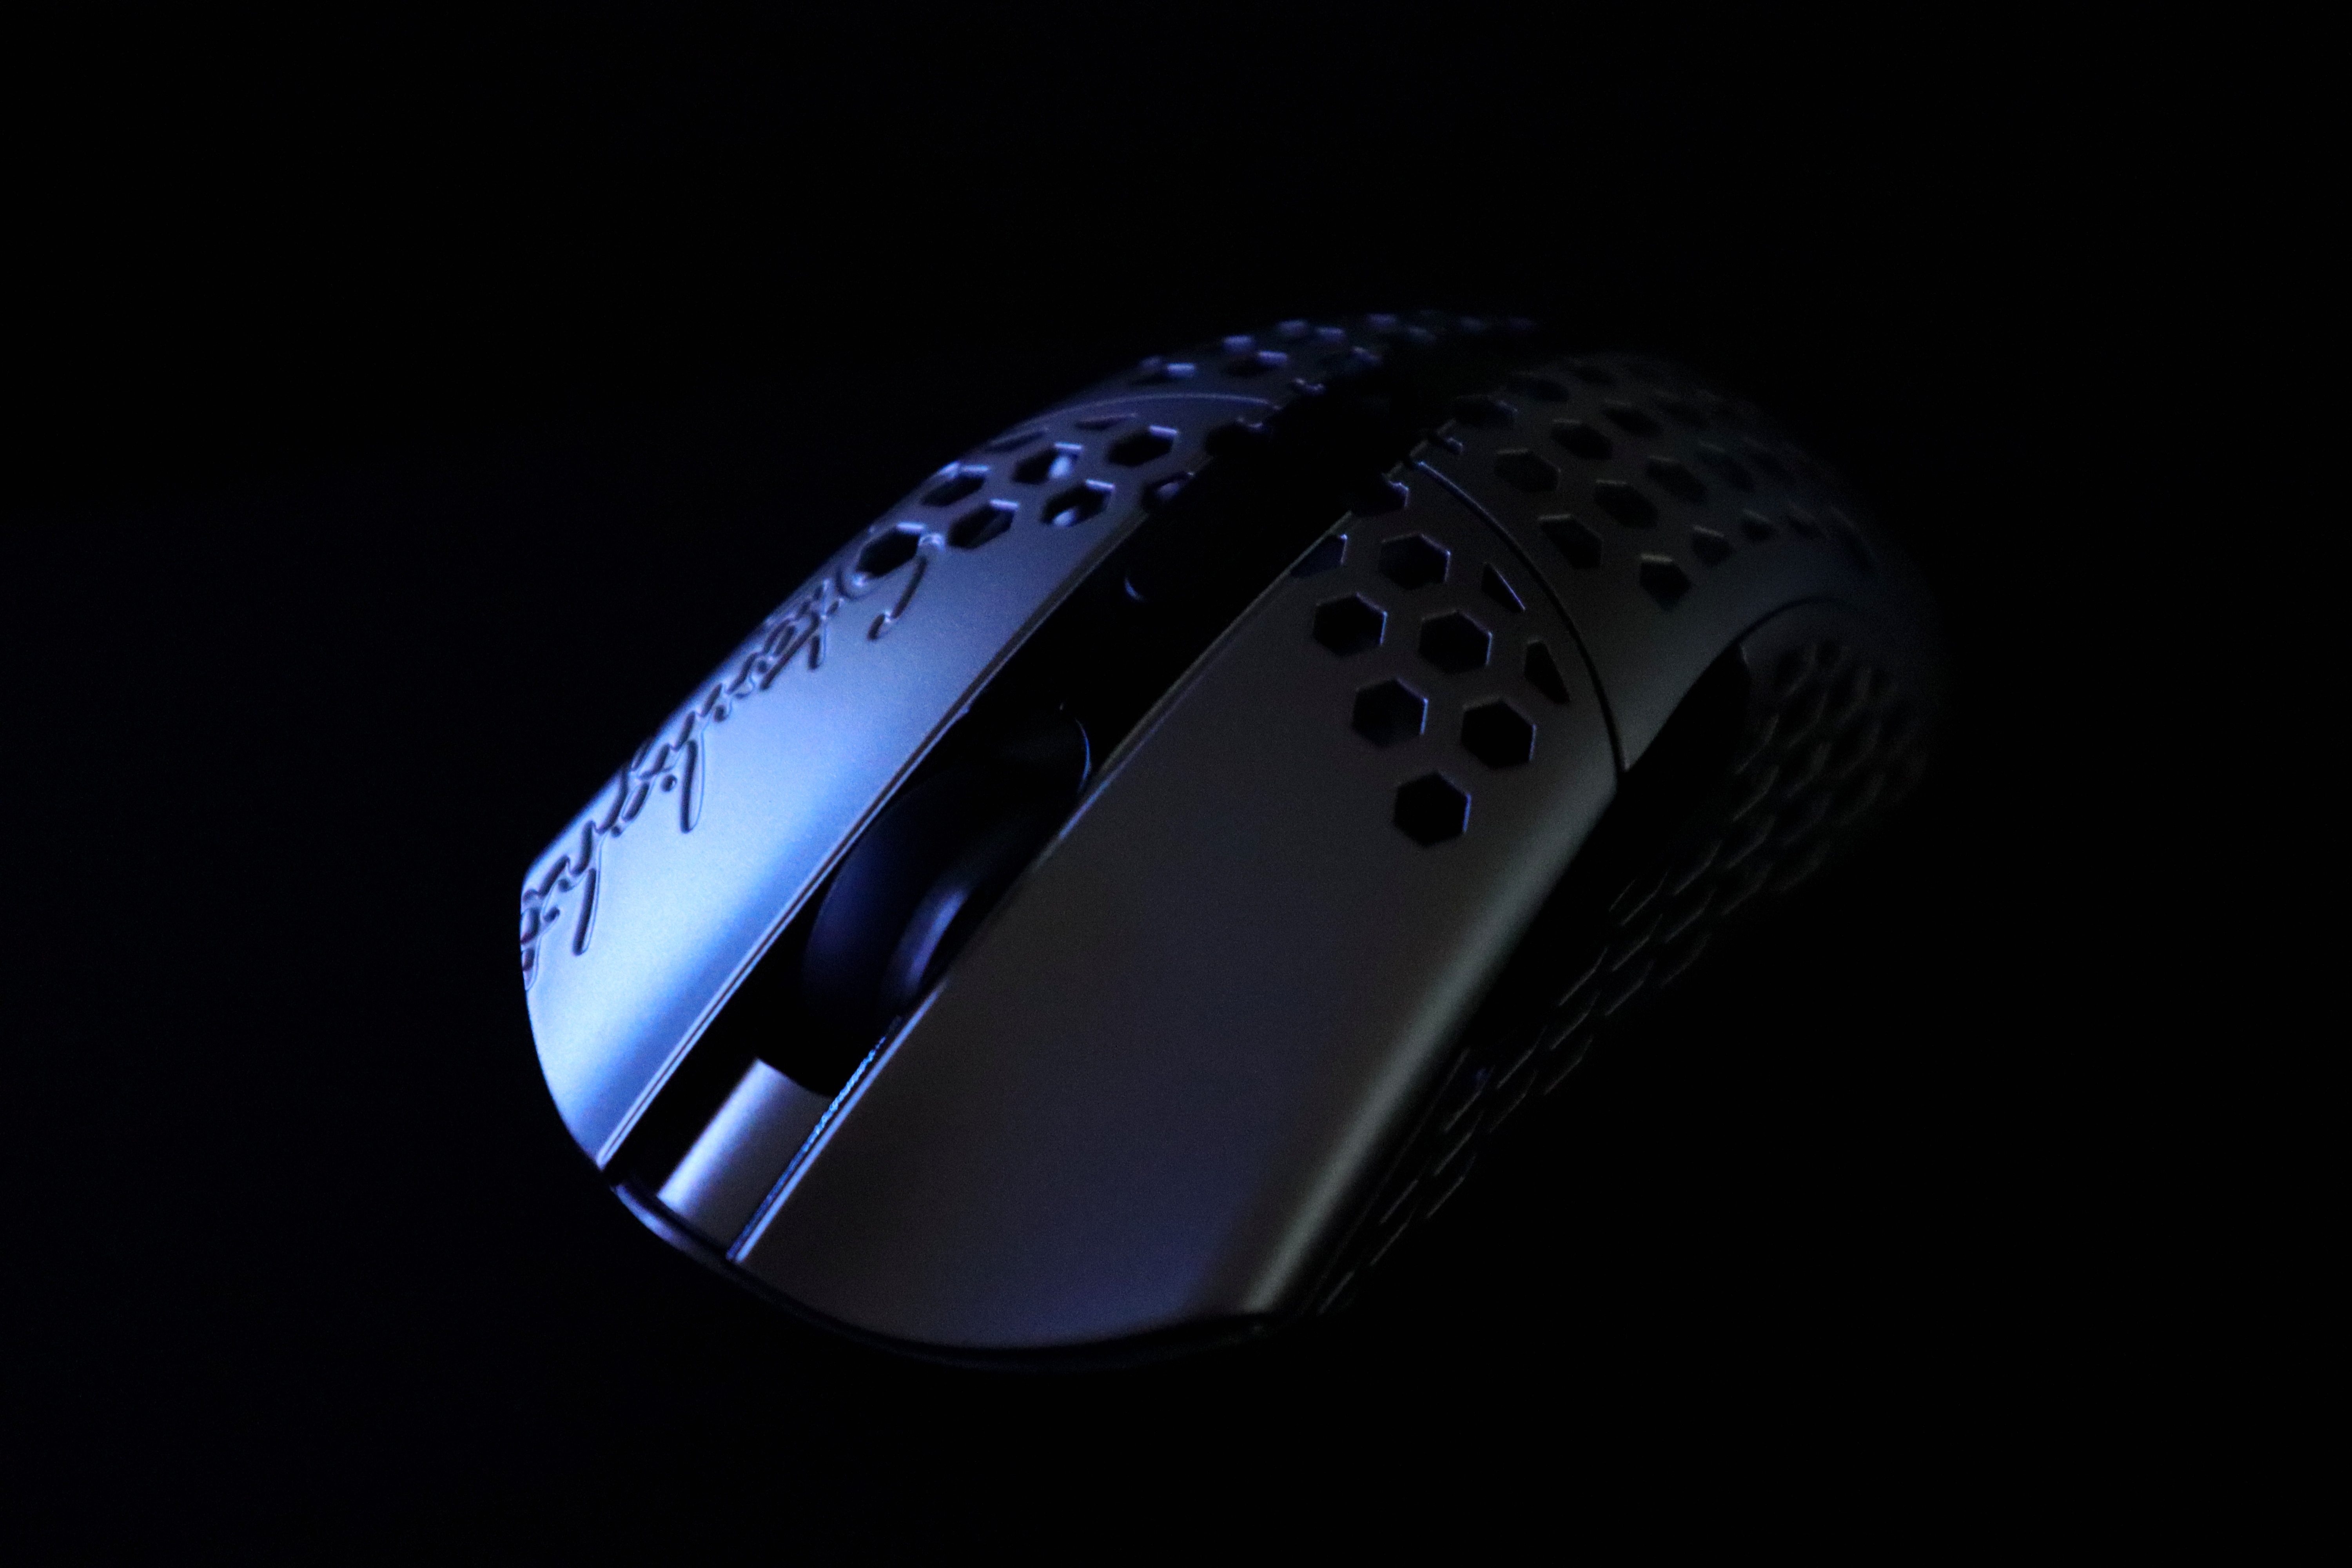 Finalmouse Starlight Pro Tenz - zFrontier 装备前线